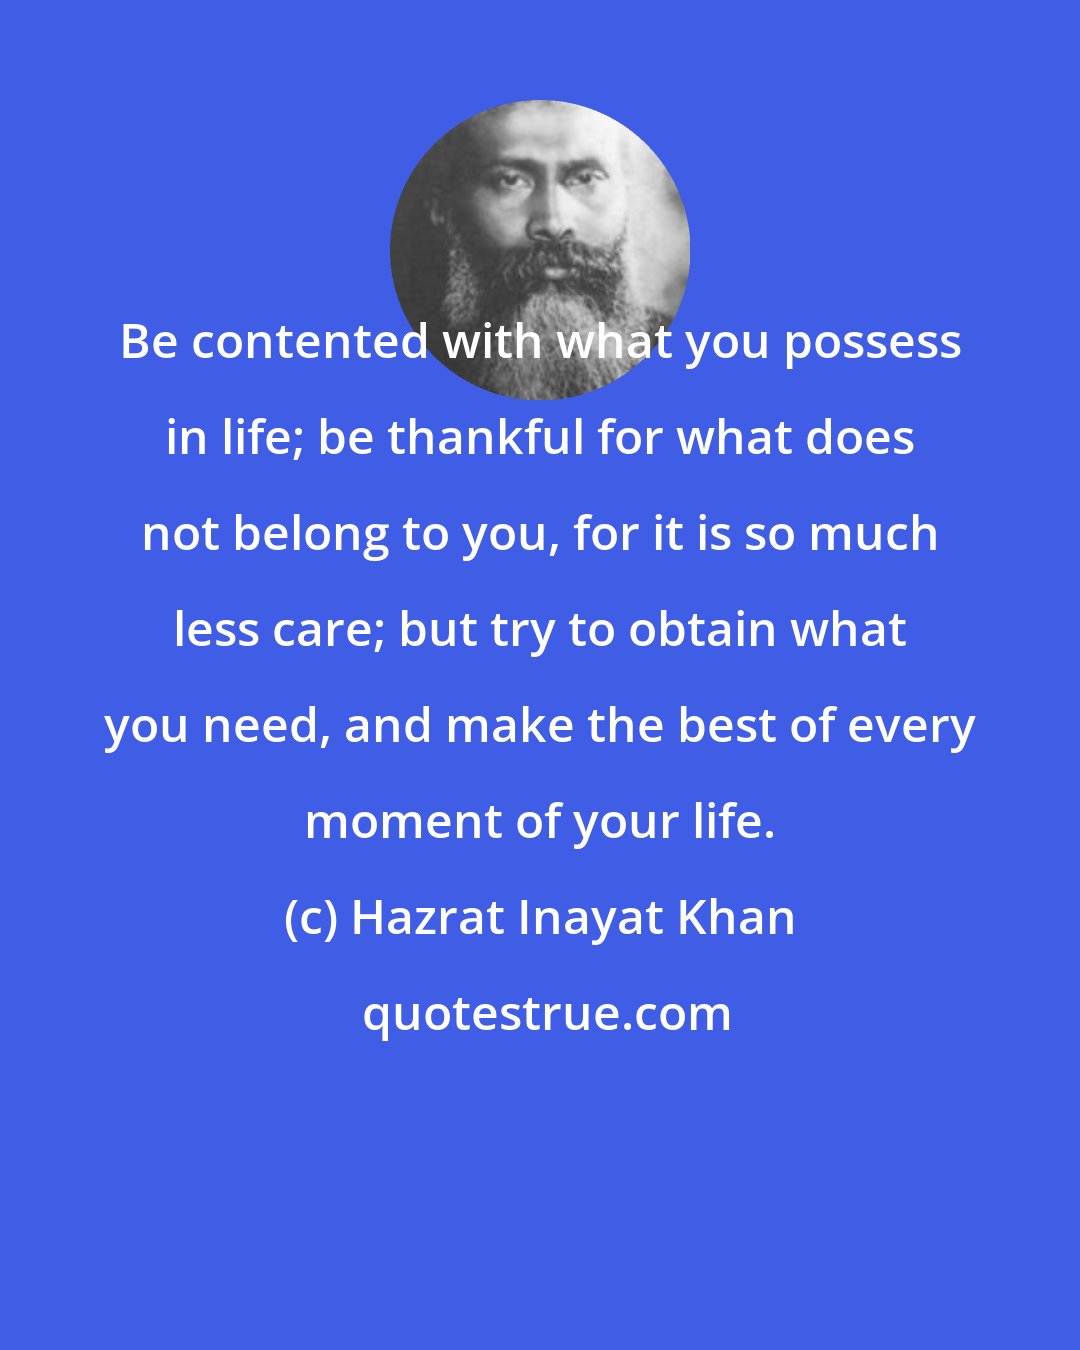 Hazrat Inayat Khan: Be contented with what you possess in life; be thankful for what does not belong to you, for it is so much less care; but try to obtain what you need, and make the best of every moment of your life.